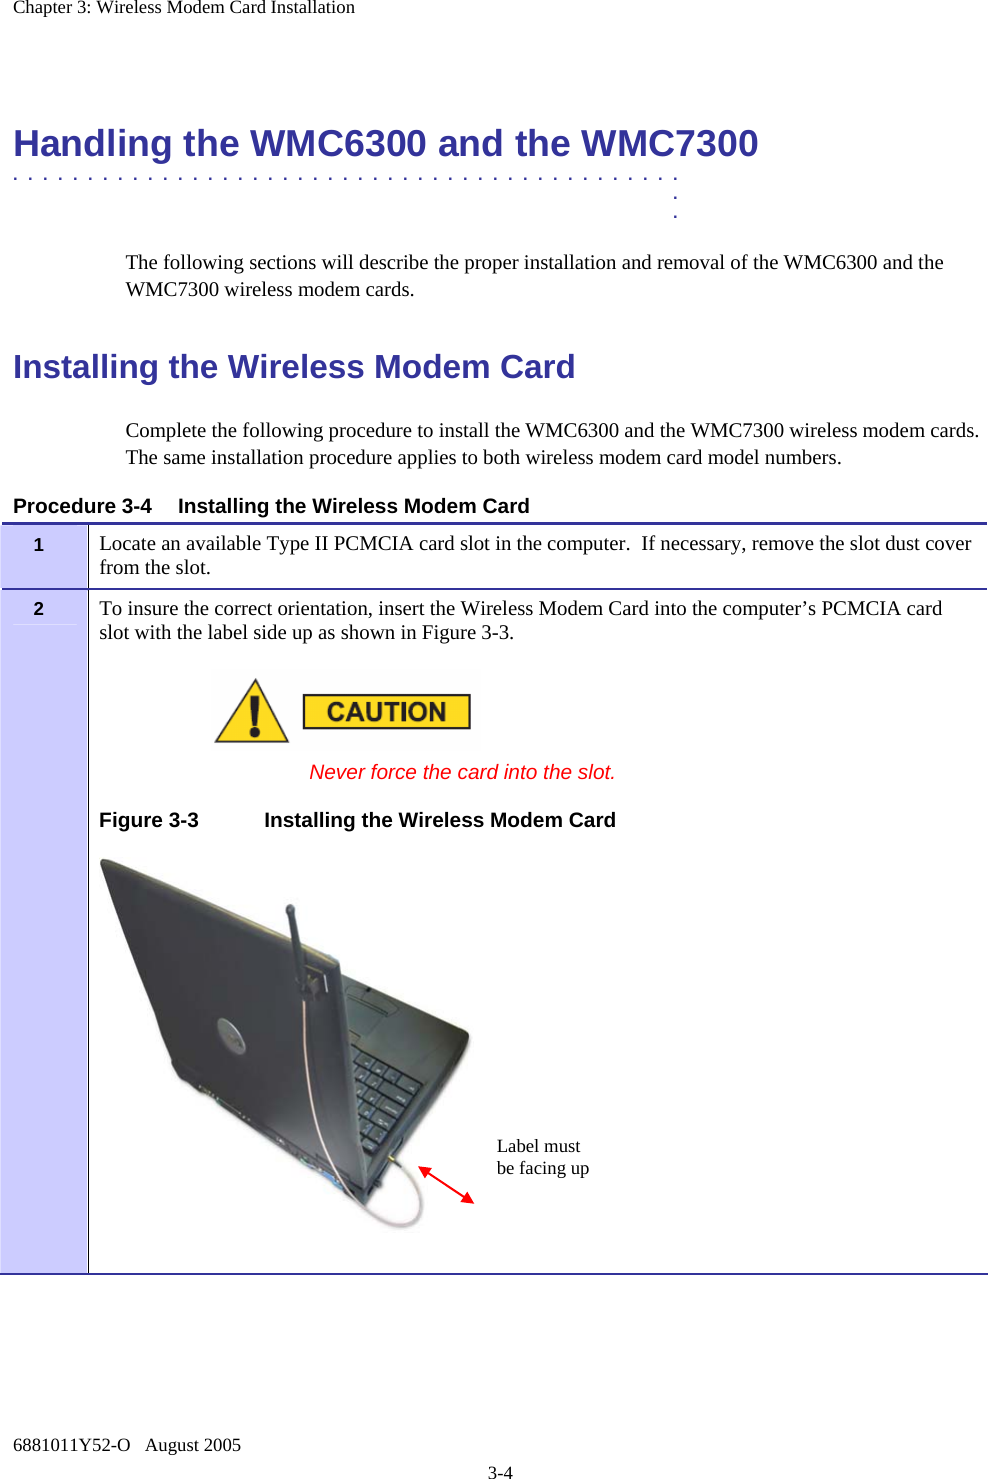 Chapter 3: Wireless Modem Card Installation 6881011Y52-O   August 2005 3-4  Handling the WMC6300 and the WMC7300 .............................................  .  . The following sections will describe the proper installation and removal of the WMC6300 and the WMC7300 wireless modem cards.  Installing the Wireless Modem Card Complete the following procedure to install the WMC6300 and the WMC7300 wireless modem cards. The same installation procedure applies to both wireless modem card model numbers.  Procedure 3-4  Installing the Wireless Modem Card 1   Locate an available Type II PCMCIA card slot in the computer.  If necessary, remove the slot dust cover from the slot. 2   To insure the correct orientation, insert the Wireless Modem Card into the computer’s PCMCIA card slot with the label side up as shown in Figure 3-3.   Never force the card into the slot. Figure 3-3  Installing the Wireless Modem Card   Label must be facing up 